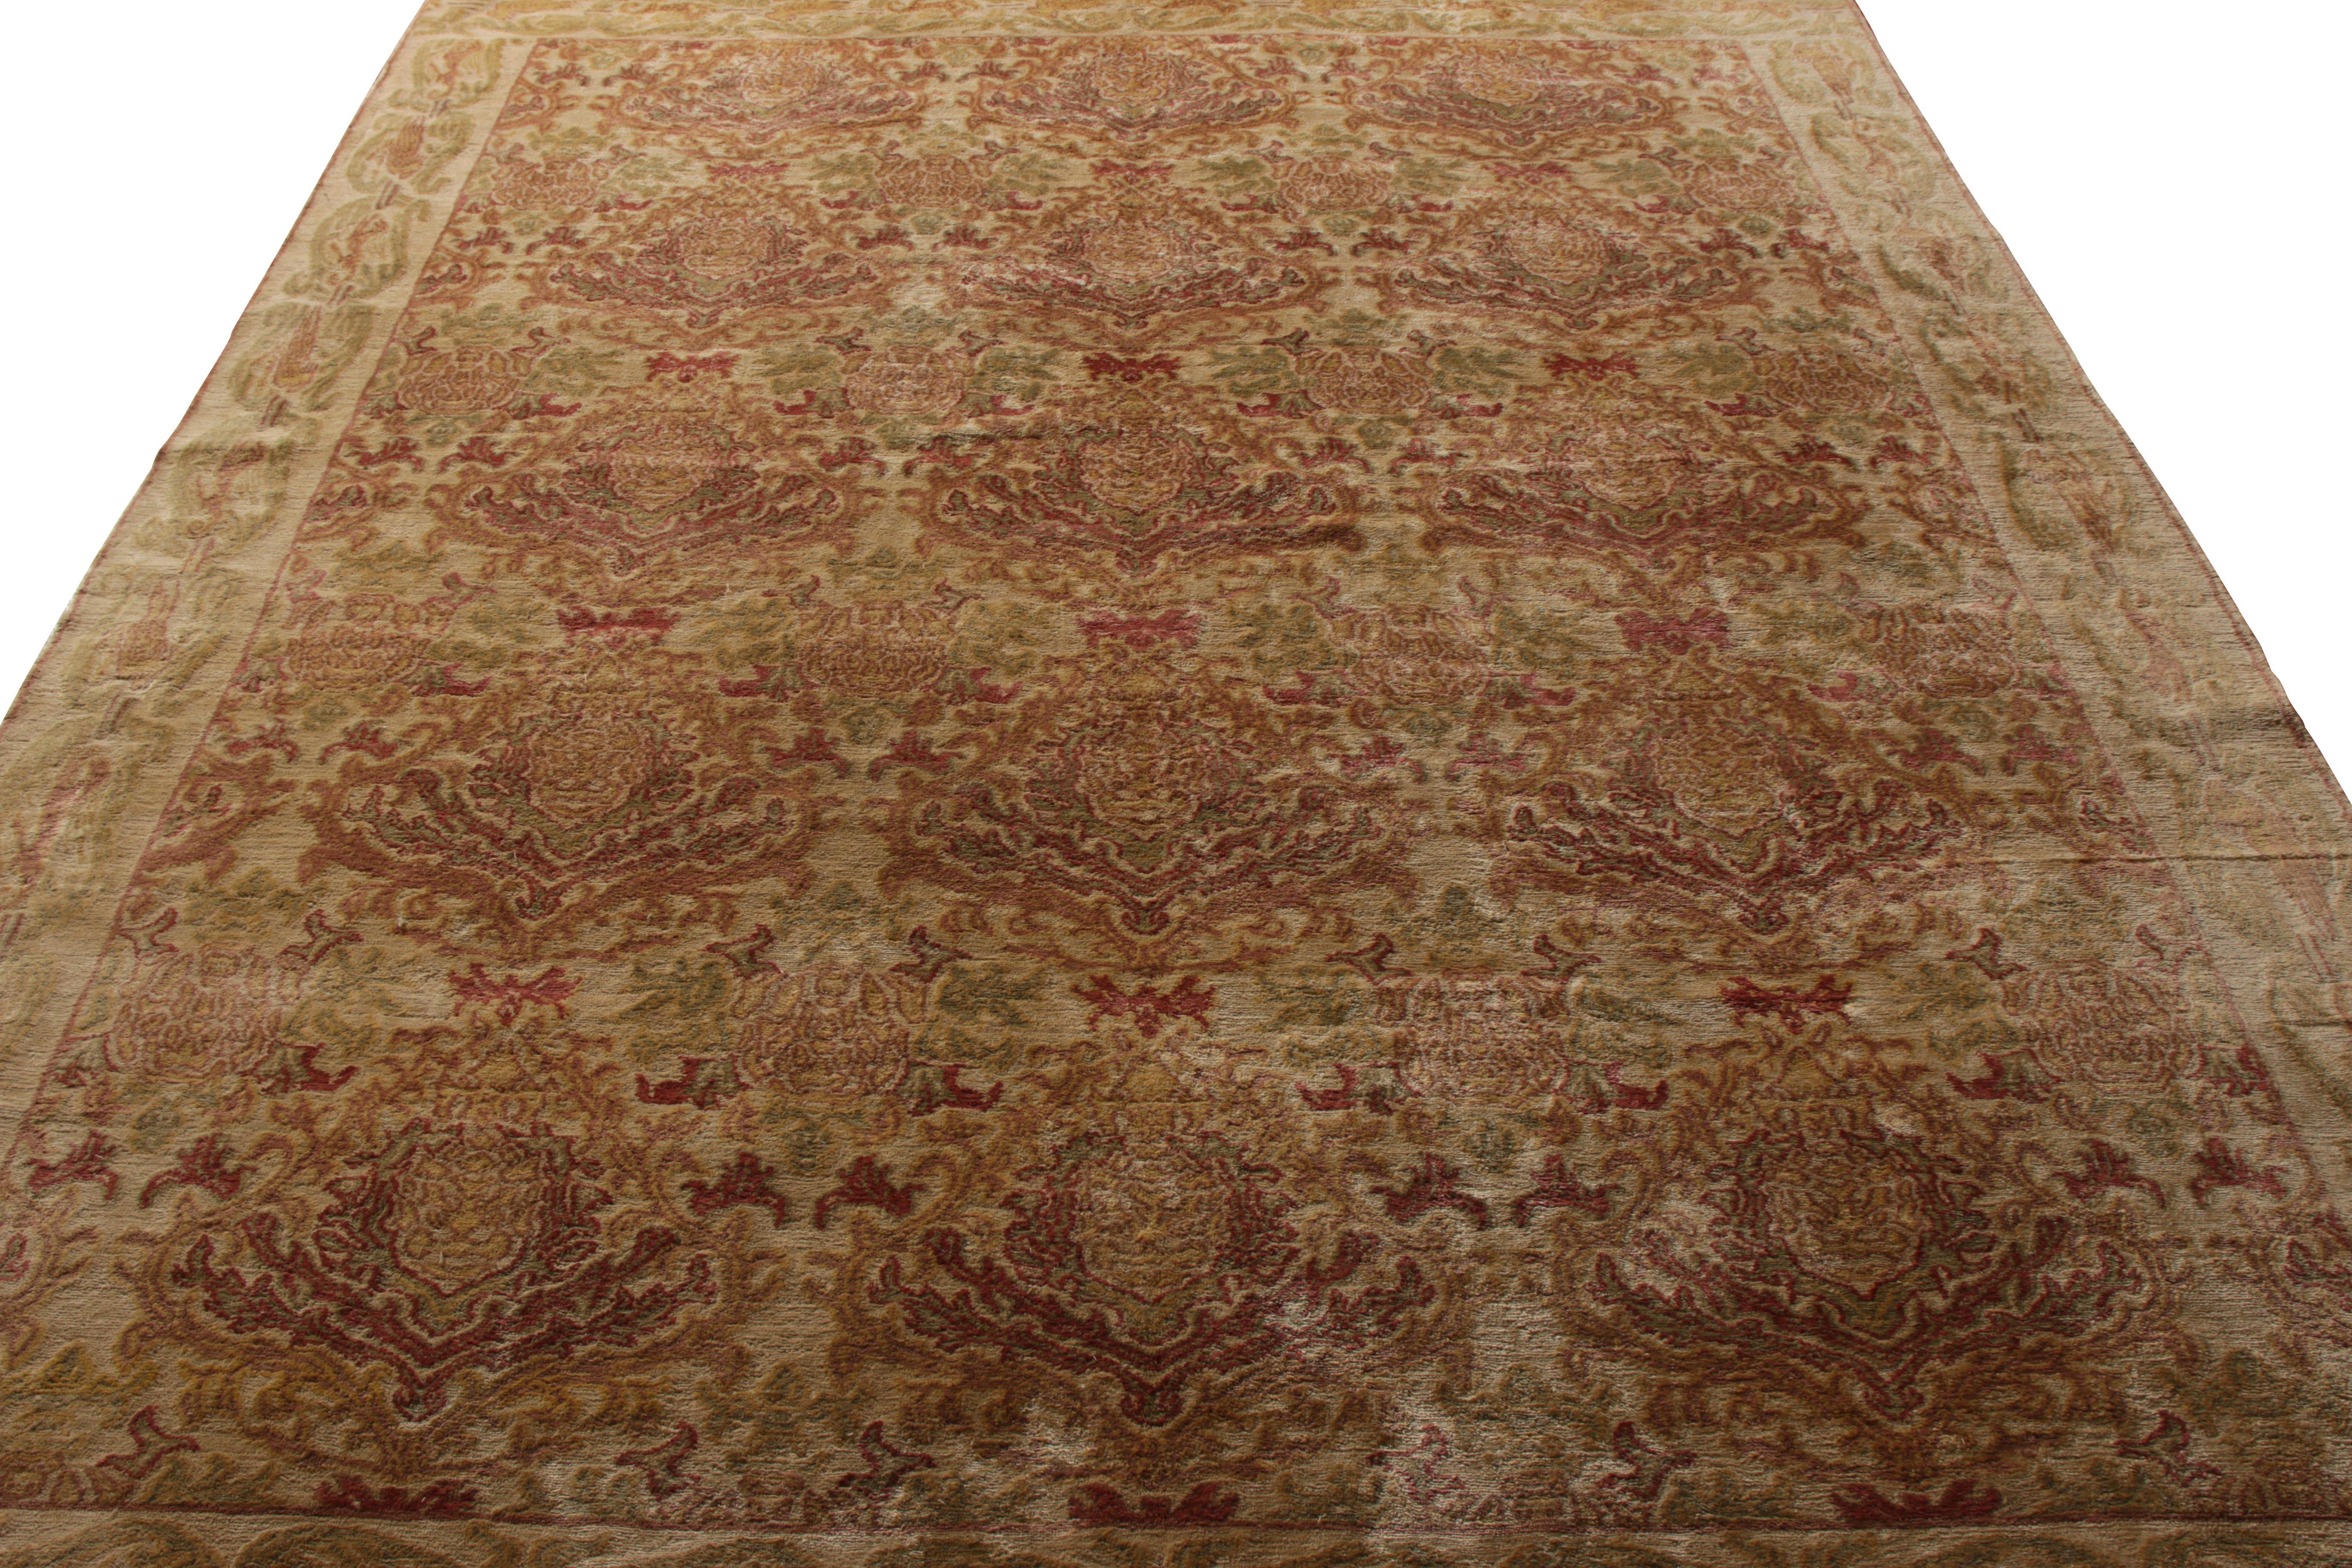 Art Deco Rug & Kilim's Hand Knotted European Style Rug Beige Brown Pink Floral Pattern For Sale